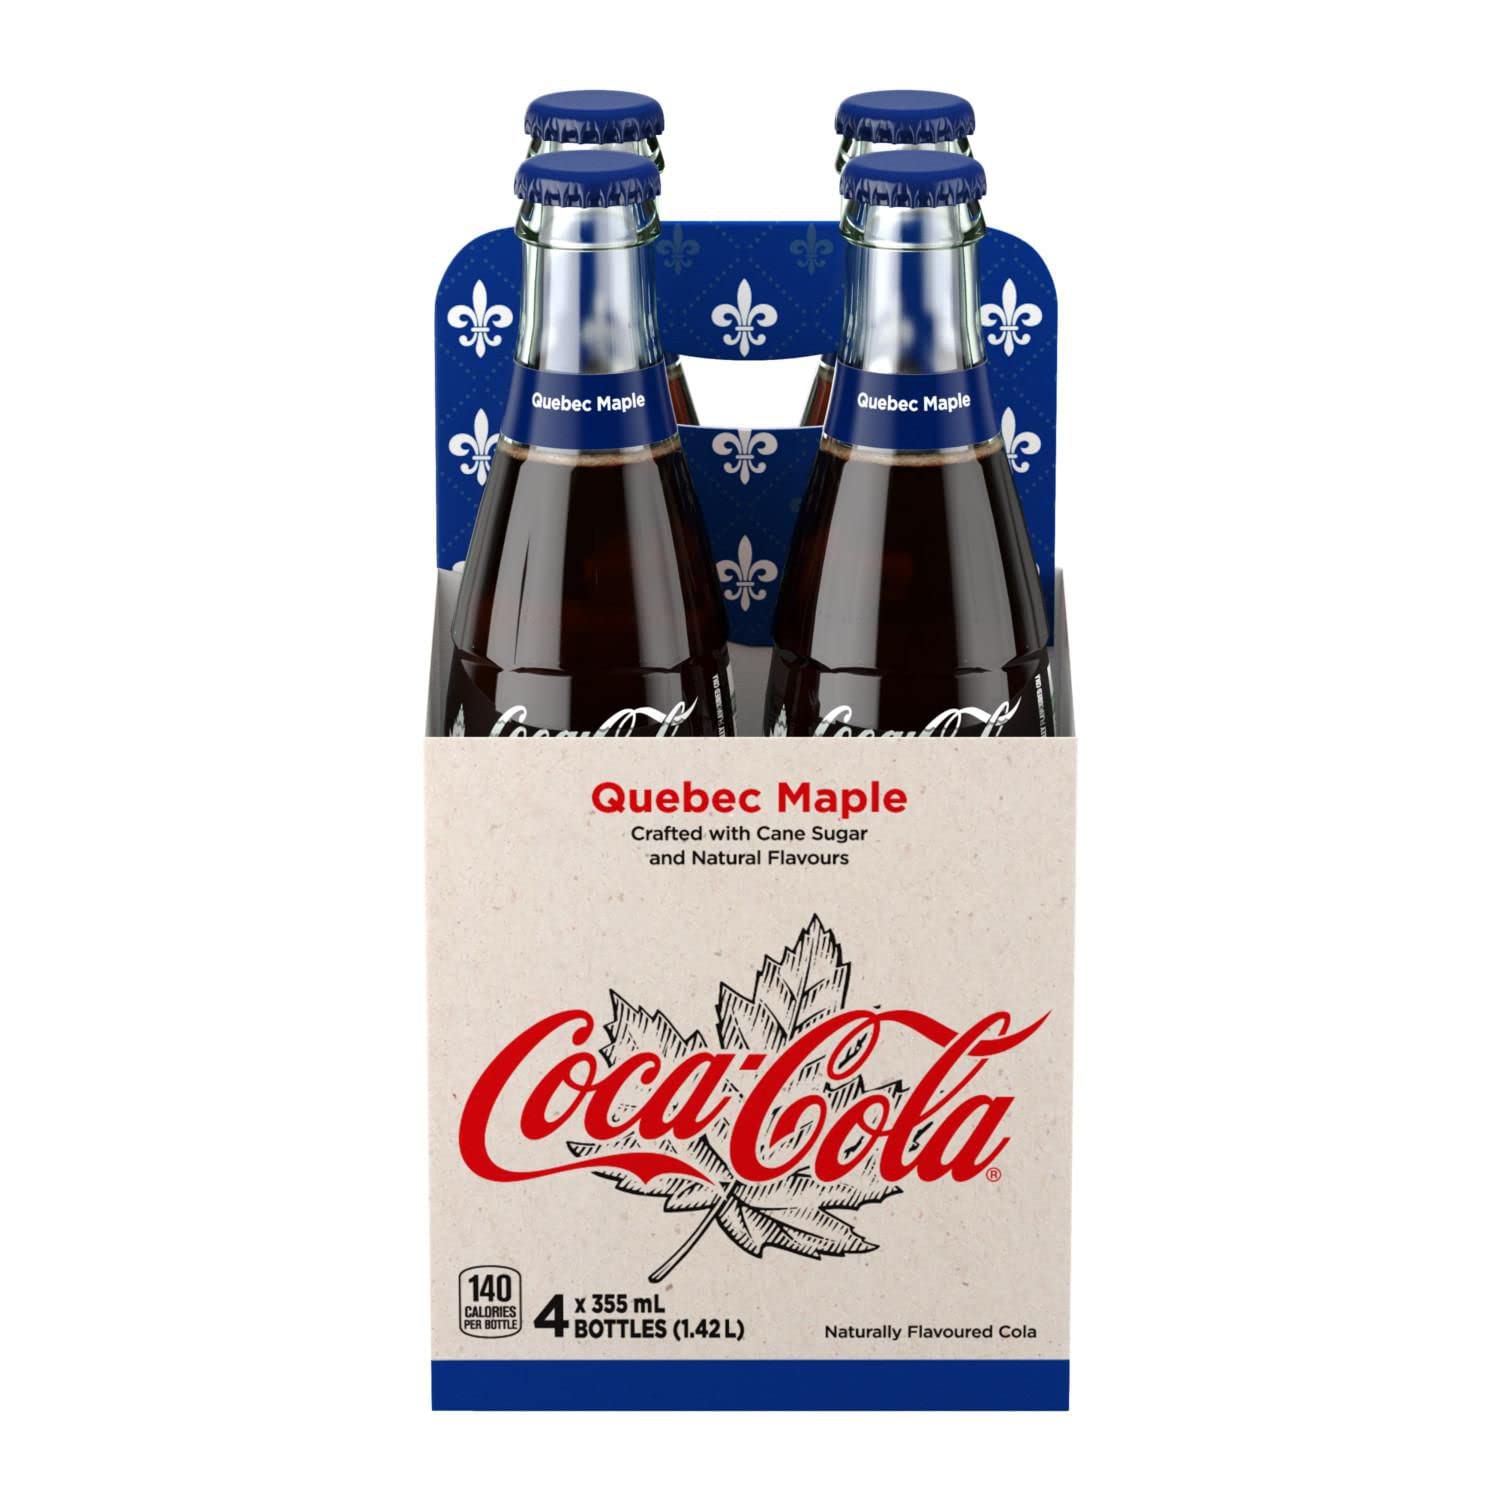 Quebec maple-flavored Coke, with
maple leafs and fleur-de-lis all over it